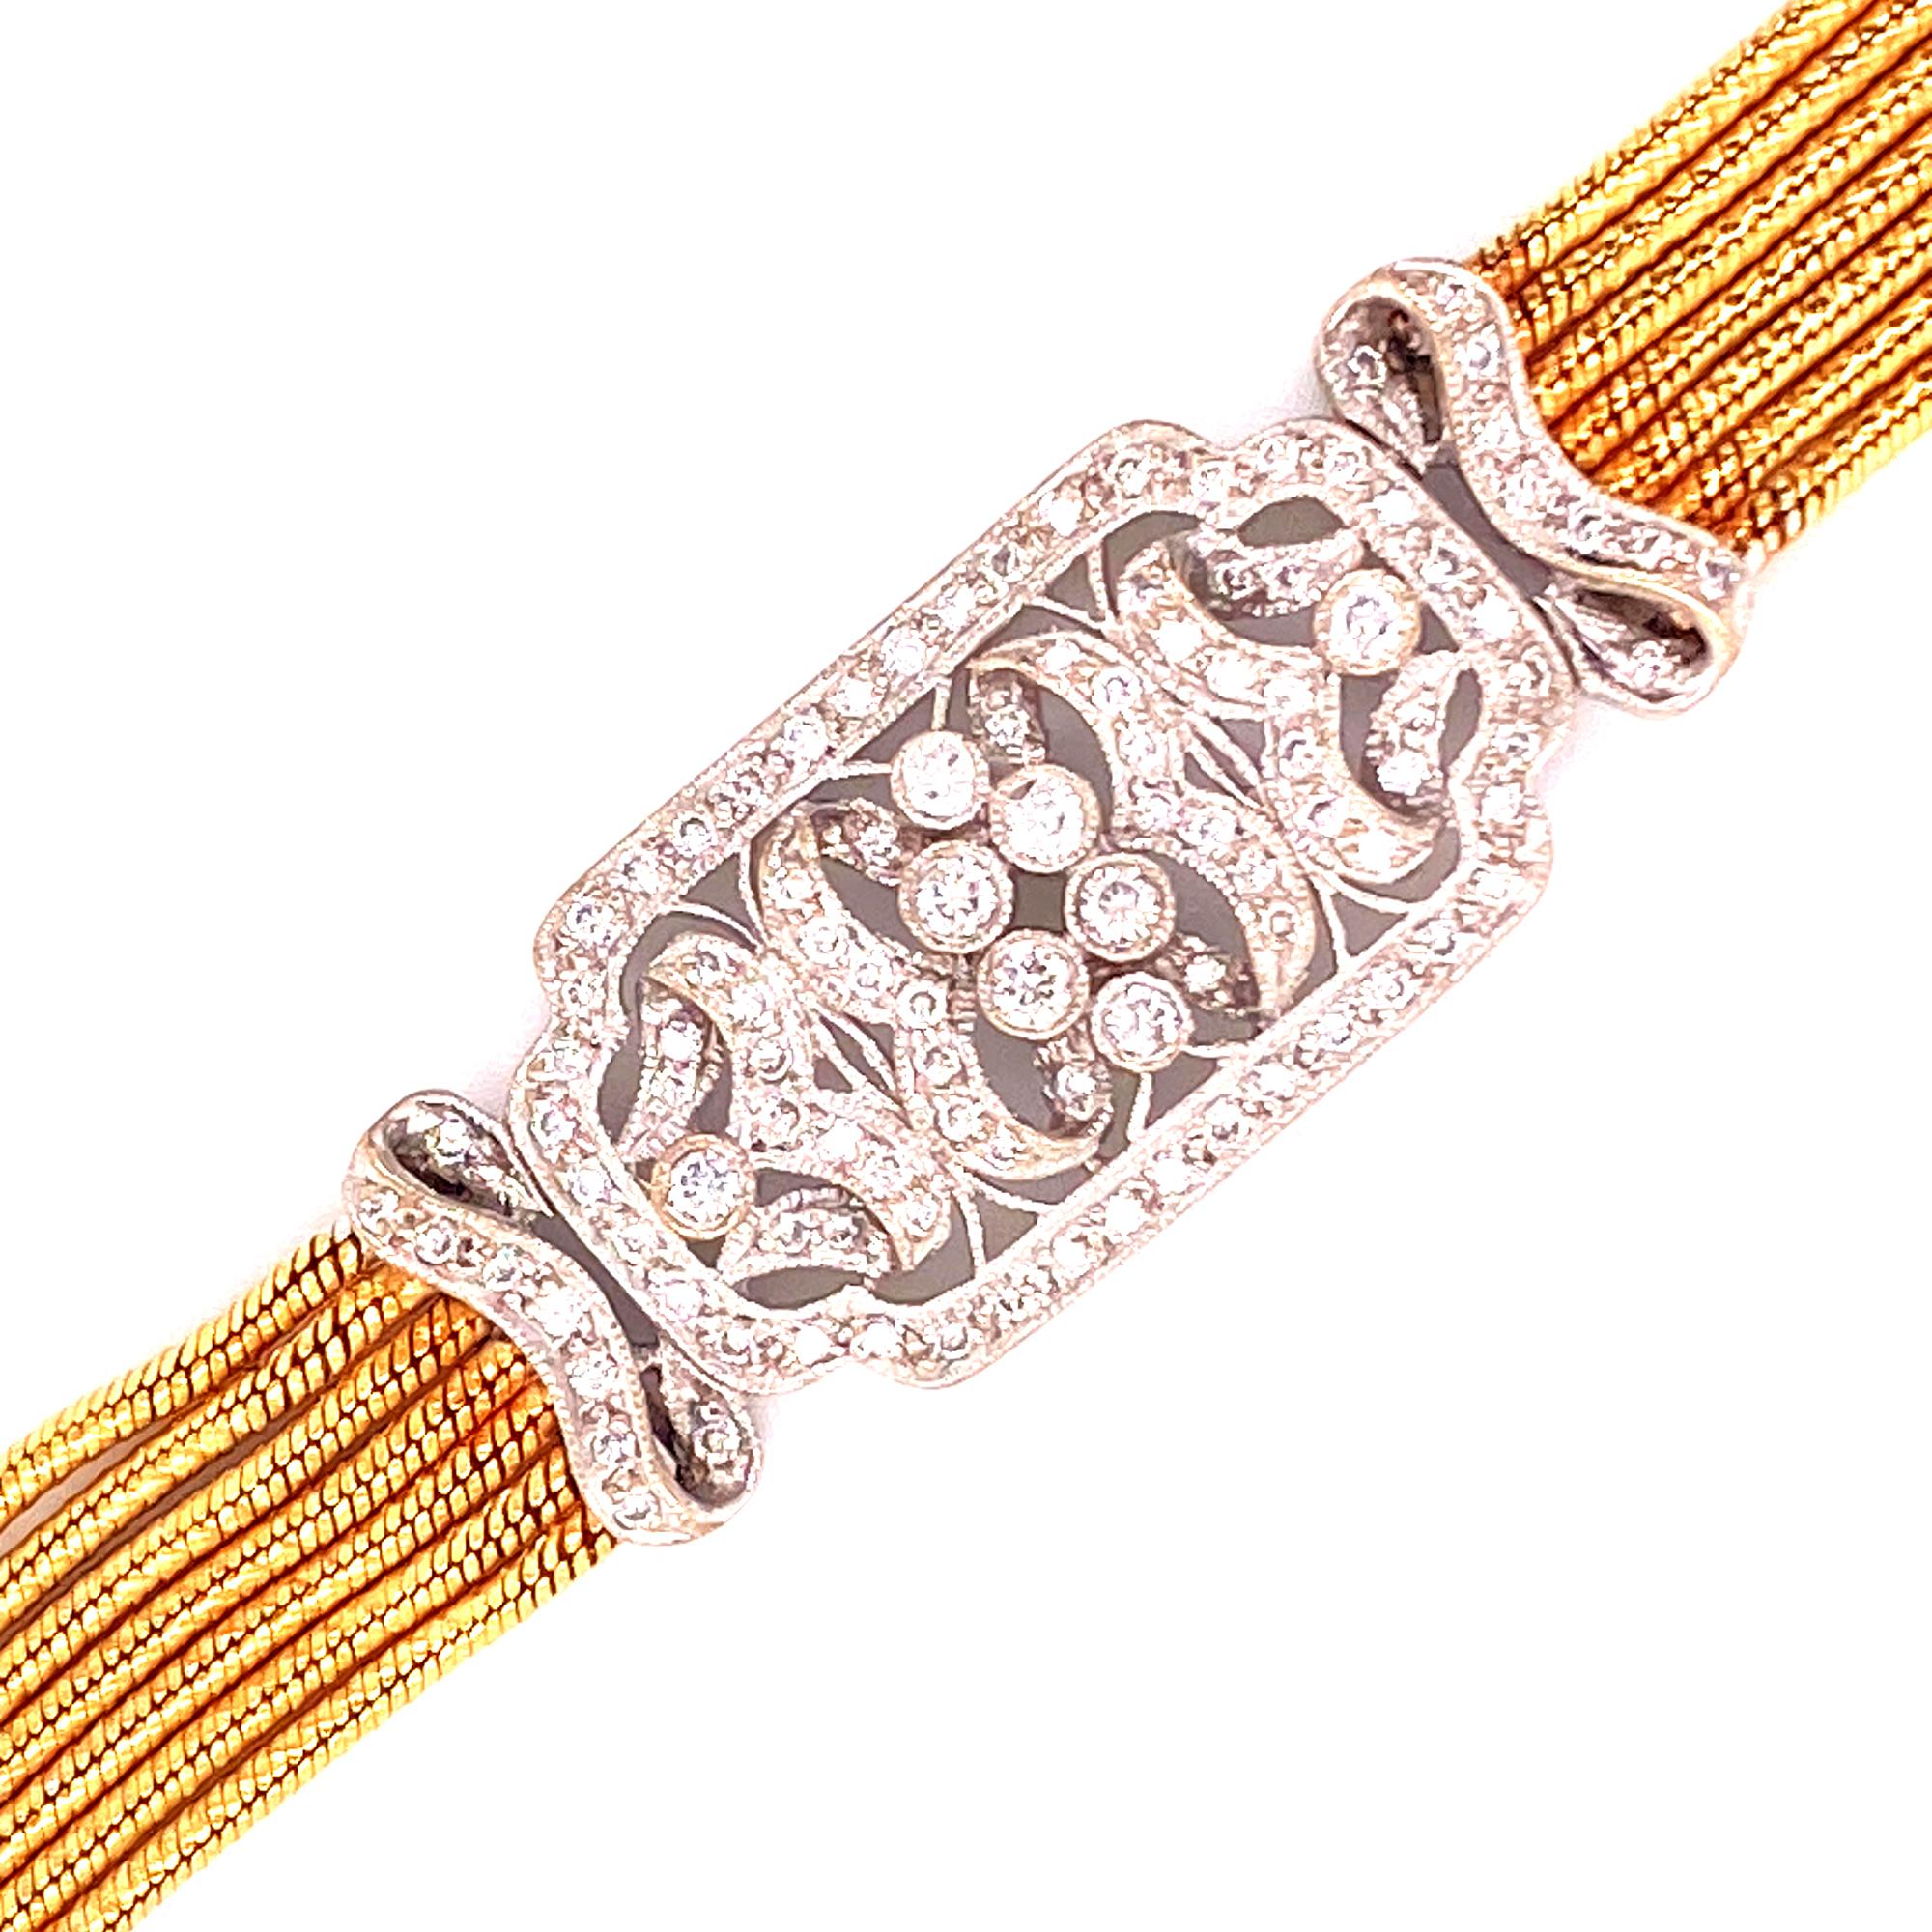 Fabulous 1950's platinum and 18 karat yellow gold bracelet. The diamond filigree top features 1.20 carat total weight of round brilliant cut diamonds graded G-H color and VS2-SI1 clarity. The beautifully hand crafted top is connected by a 7 row